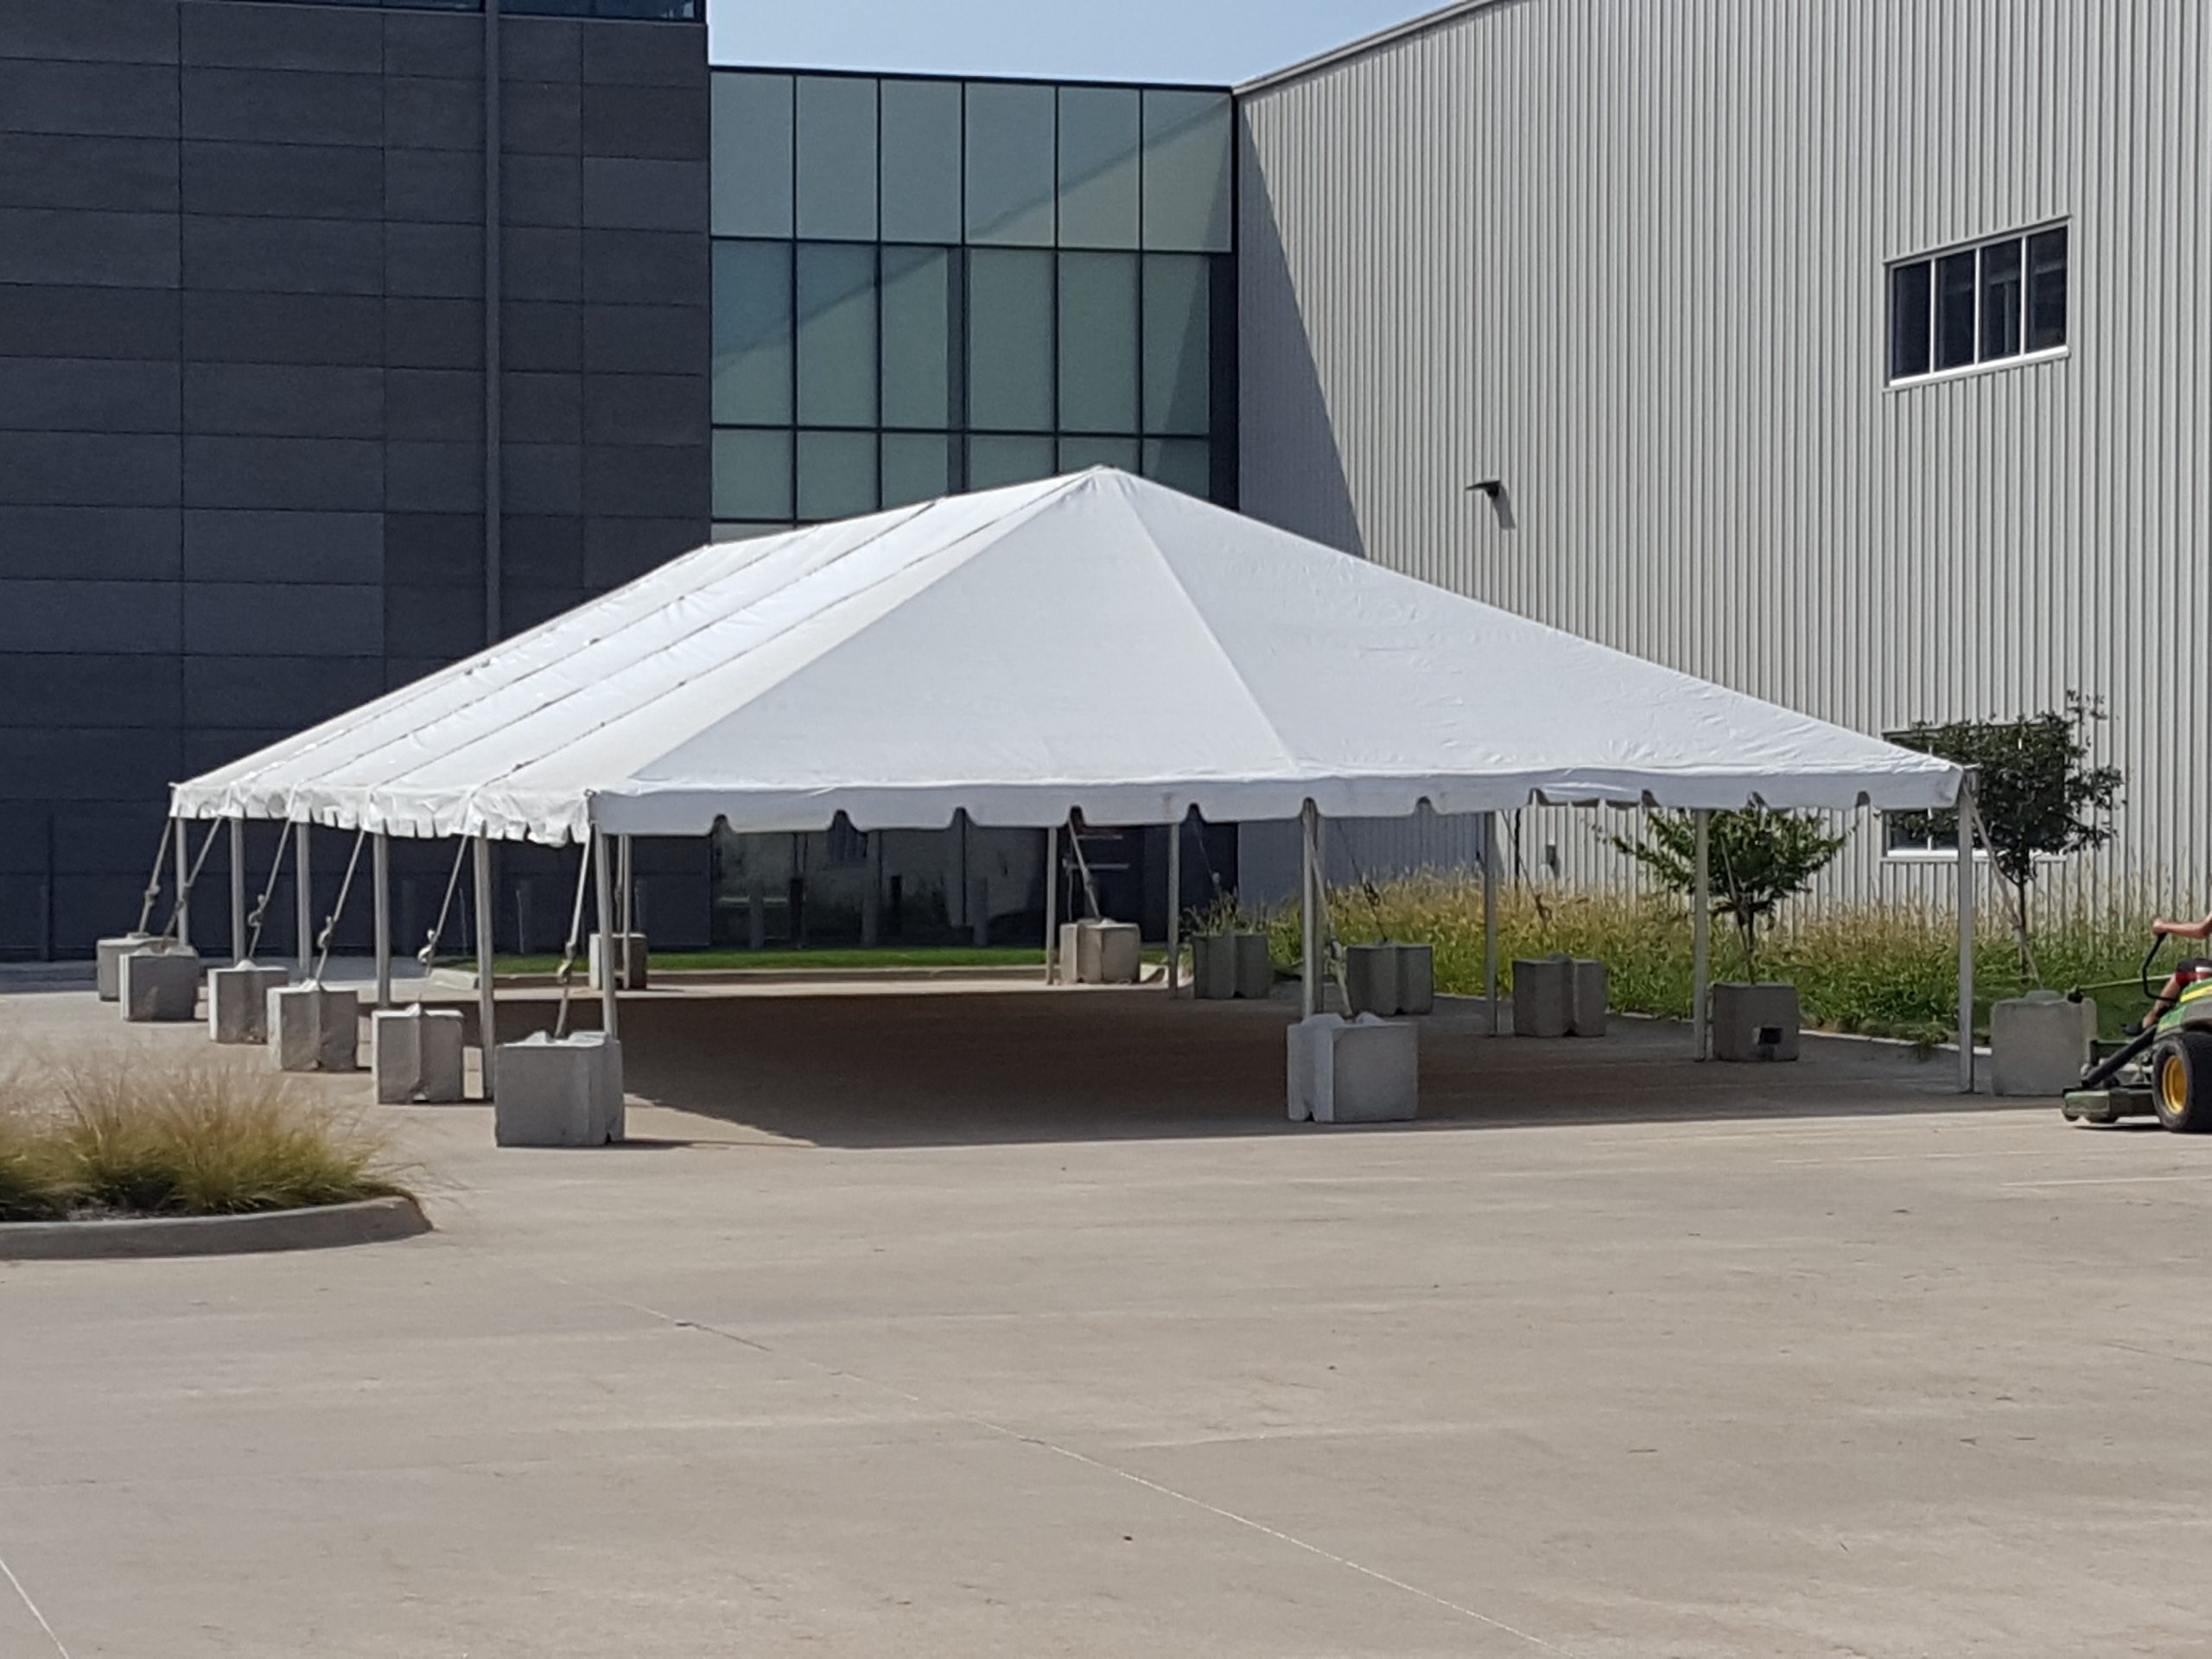 30' x 75' frame tent without sidewall with 2' x 2' x 2' bunker blocks at Brownells in Grinnell, Iowa